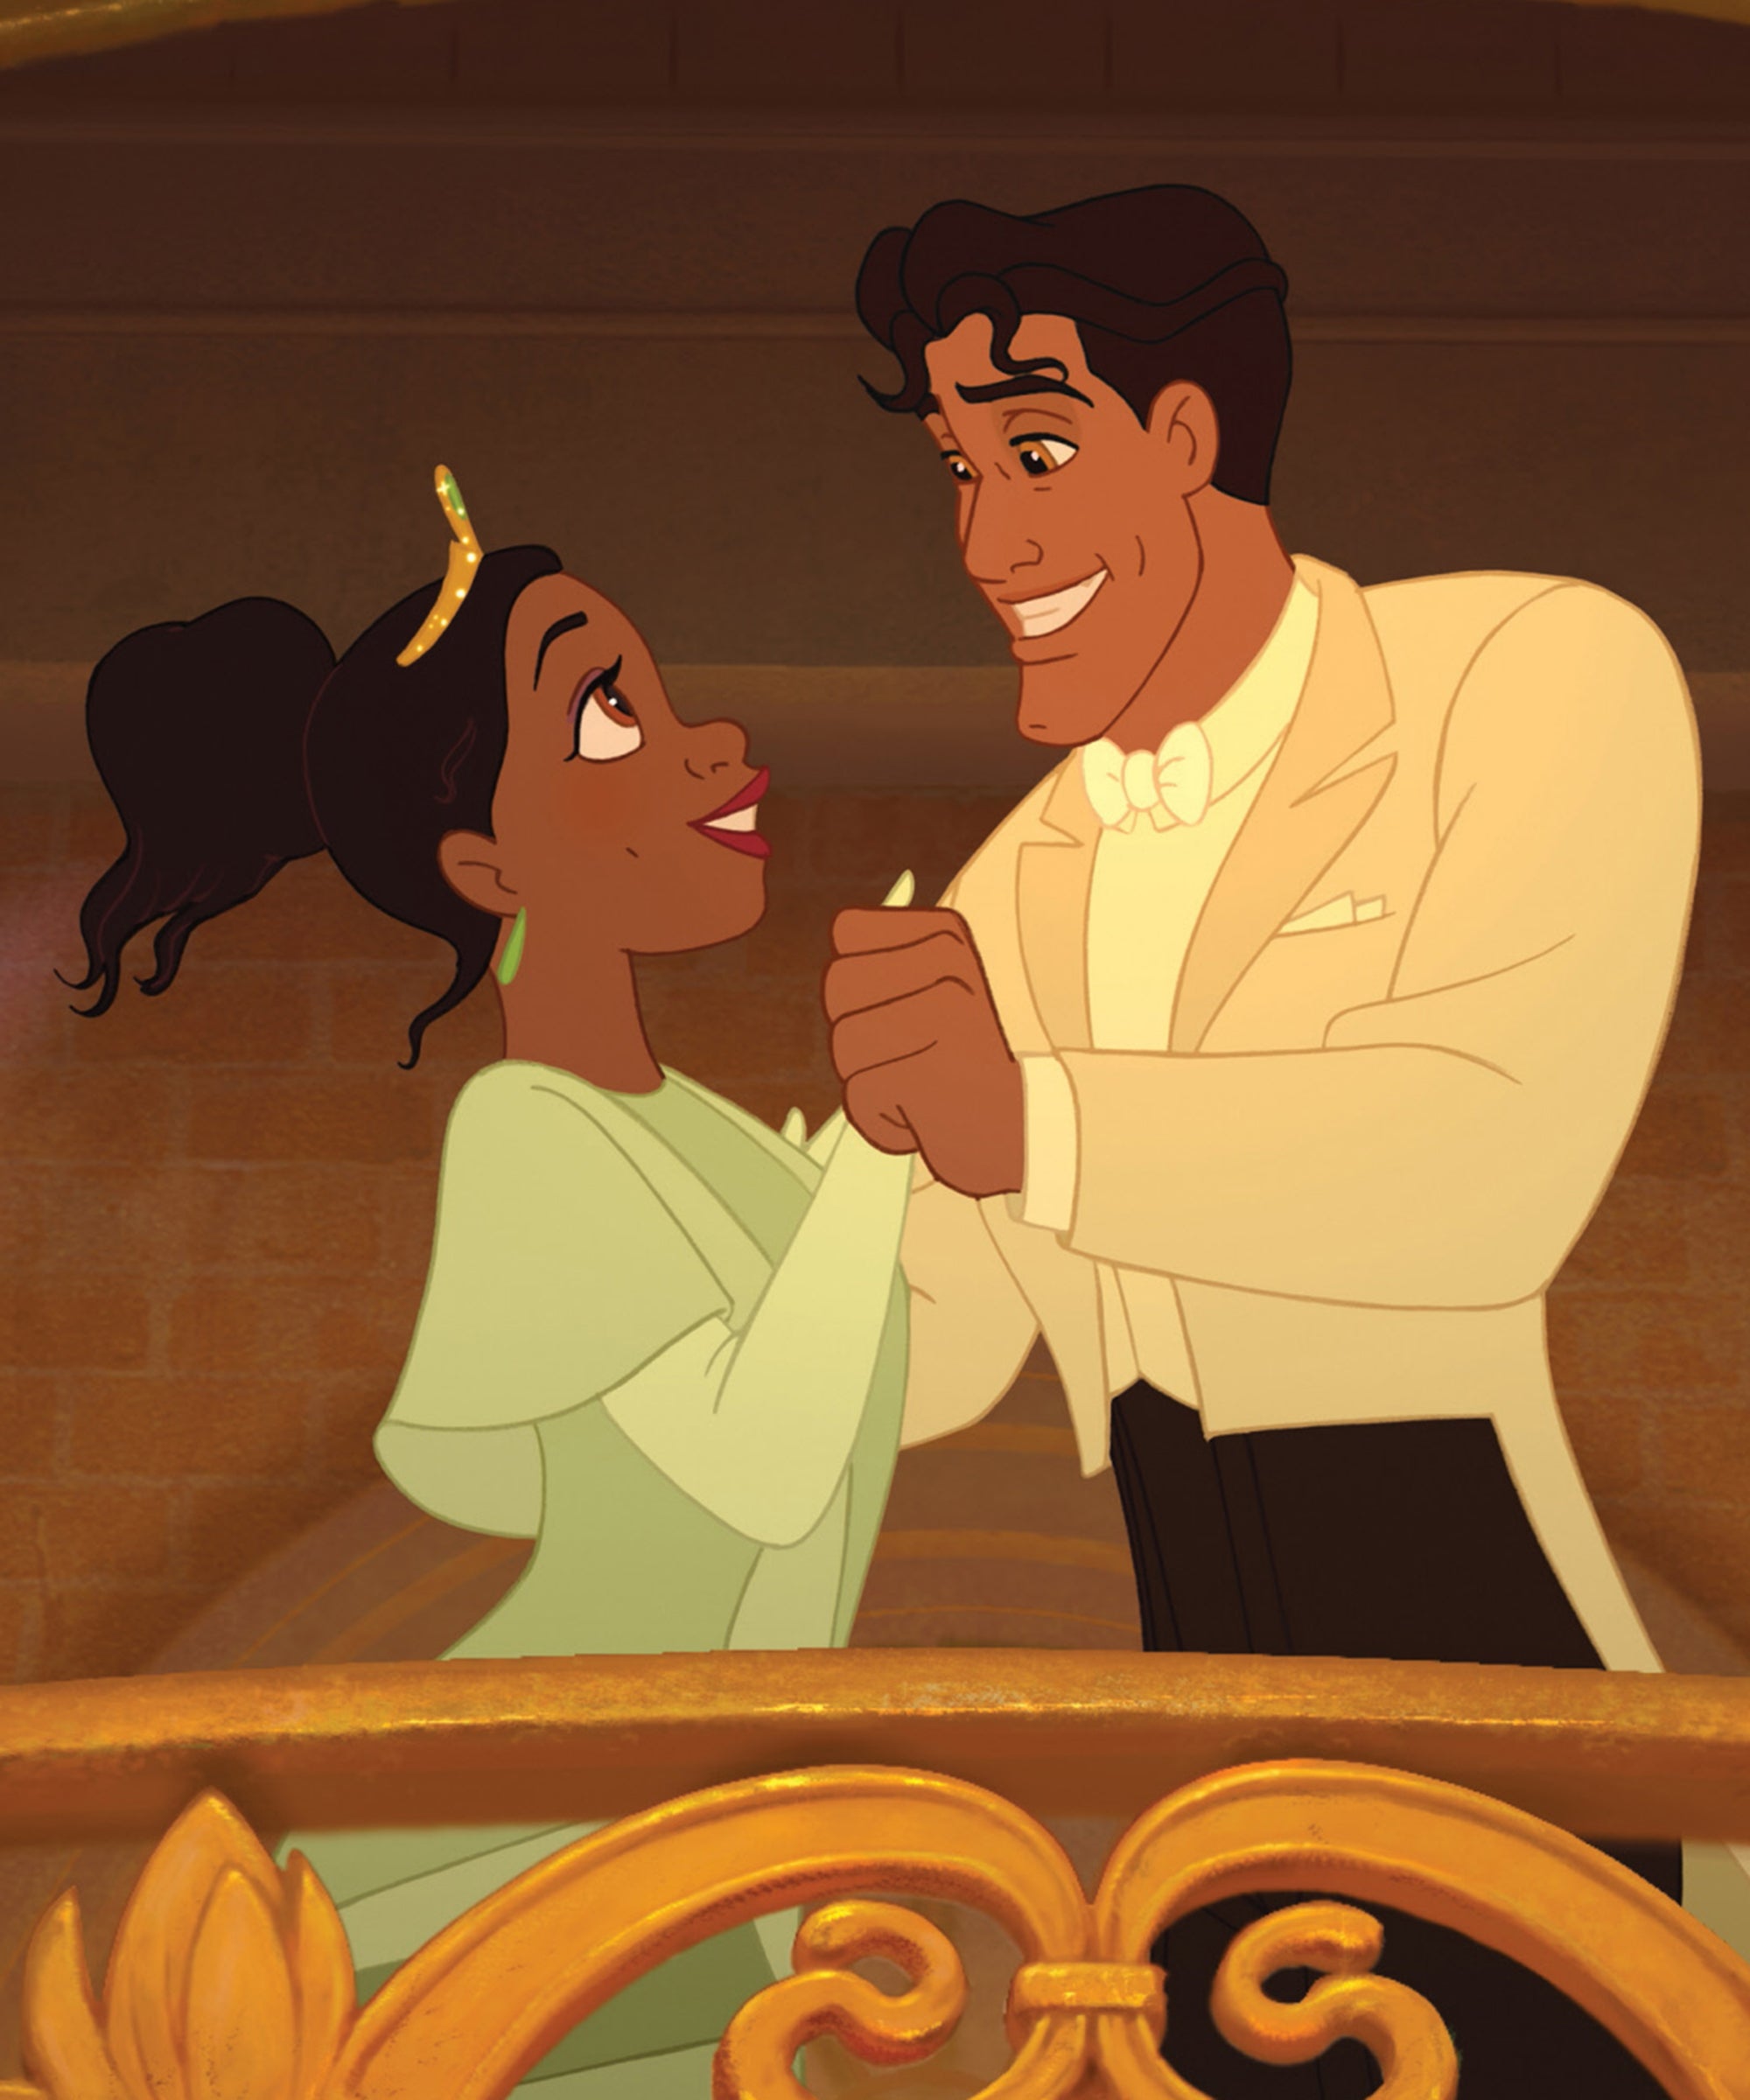 The Best Disney Couples From The Animated Movies Ranked